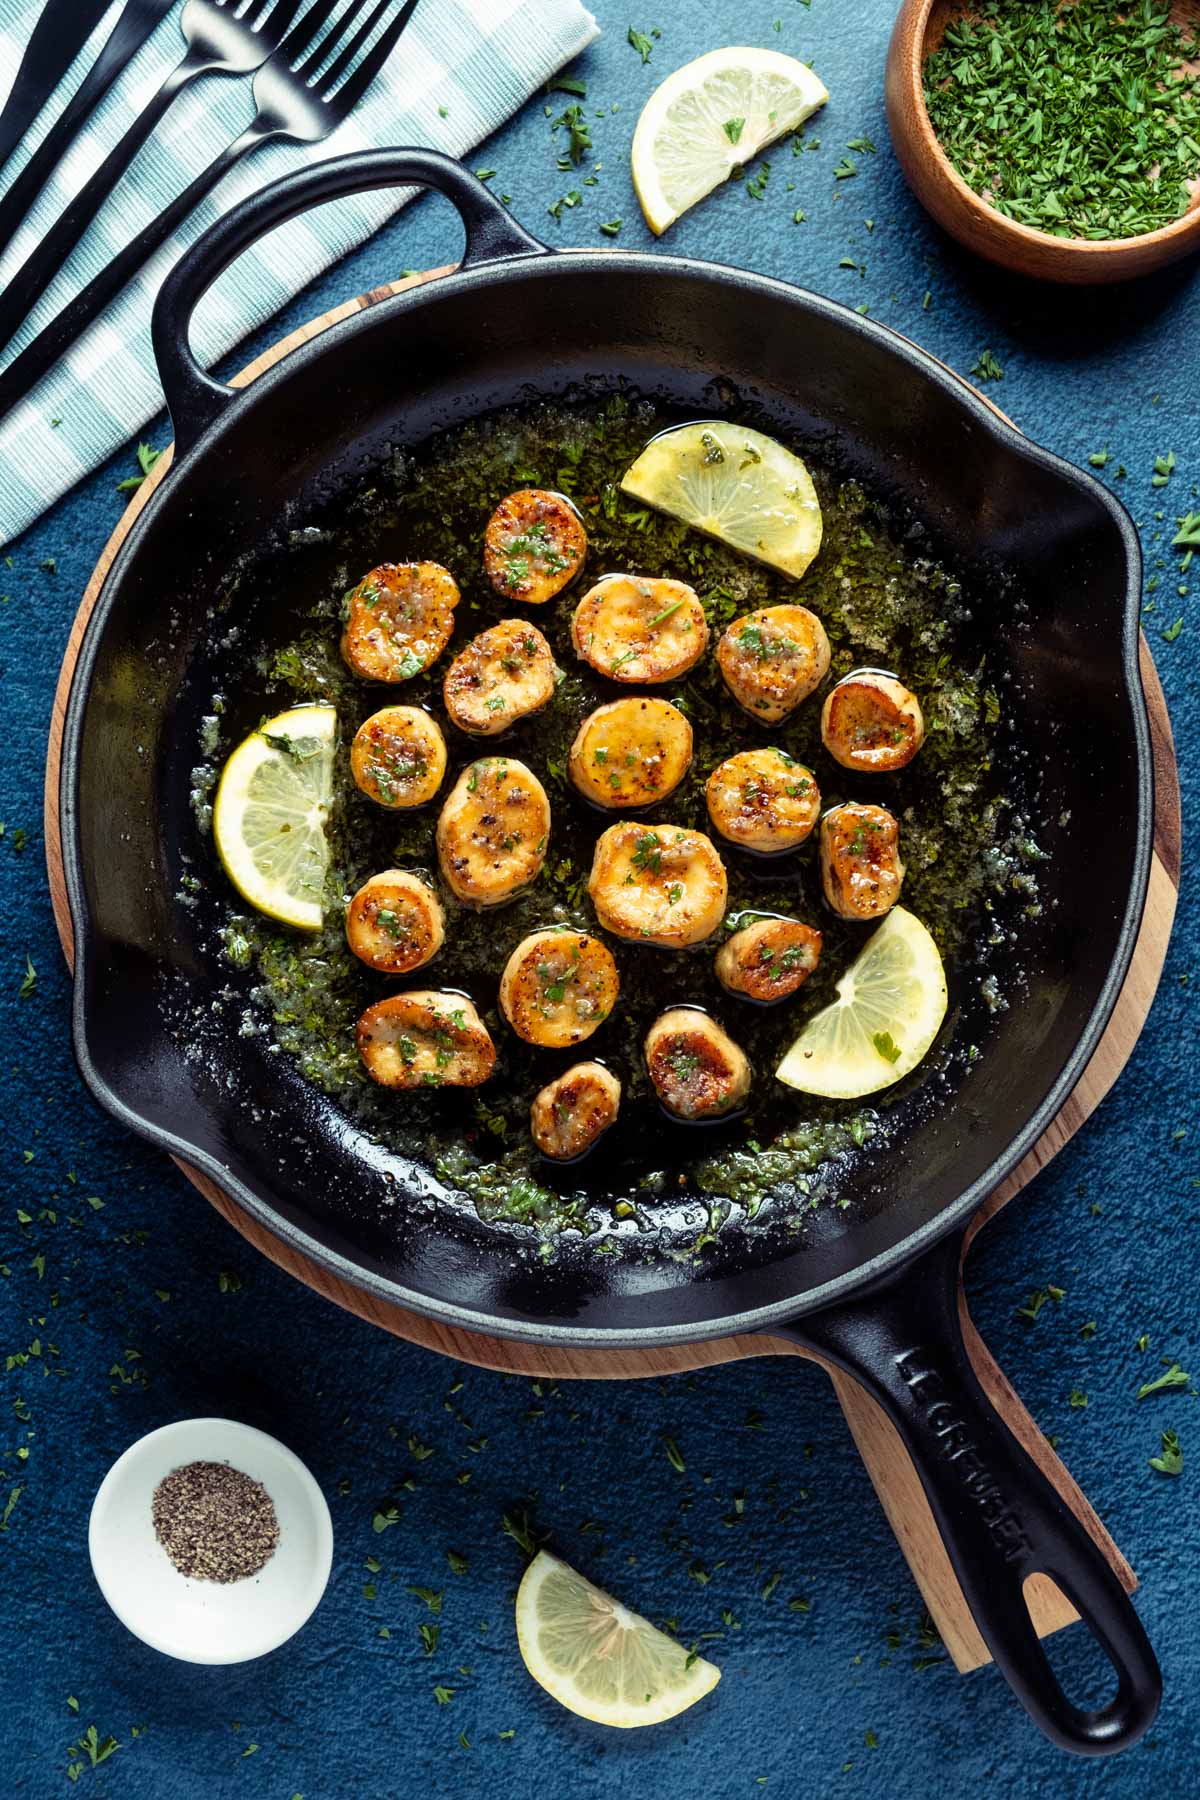 Vegan scallops in a frying pan with lemon slices and parsley.